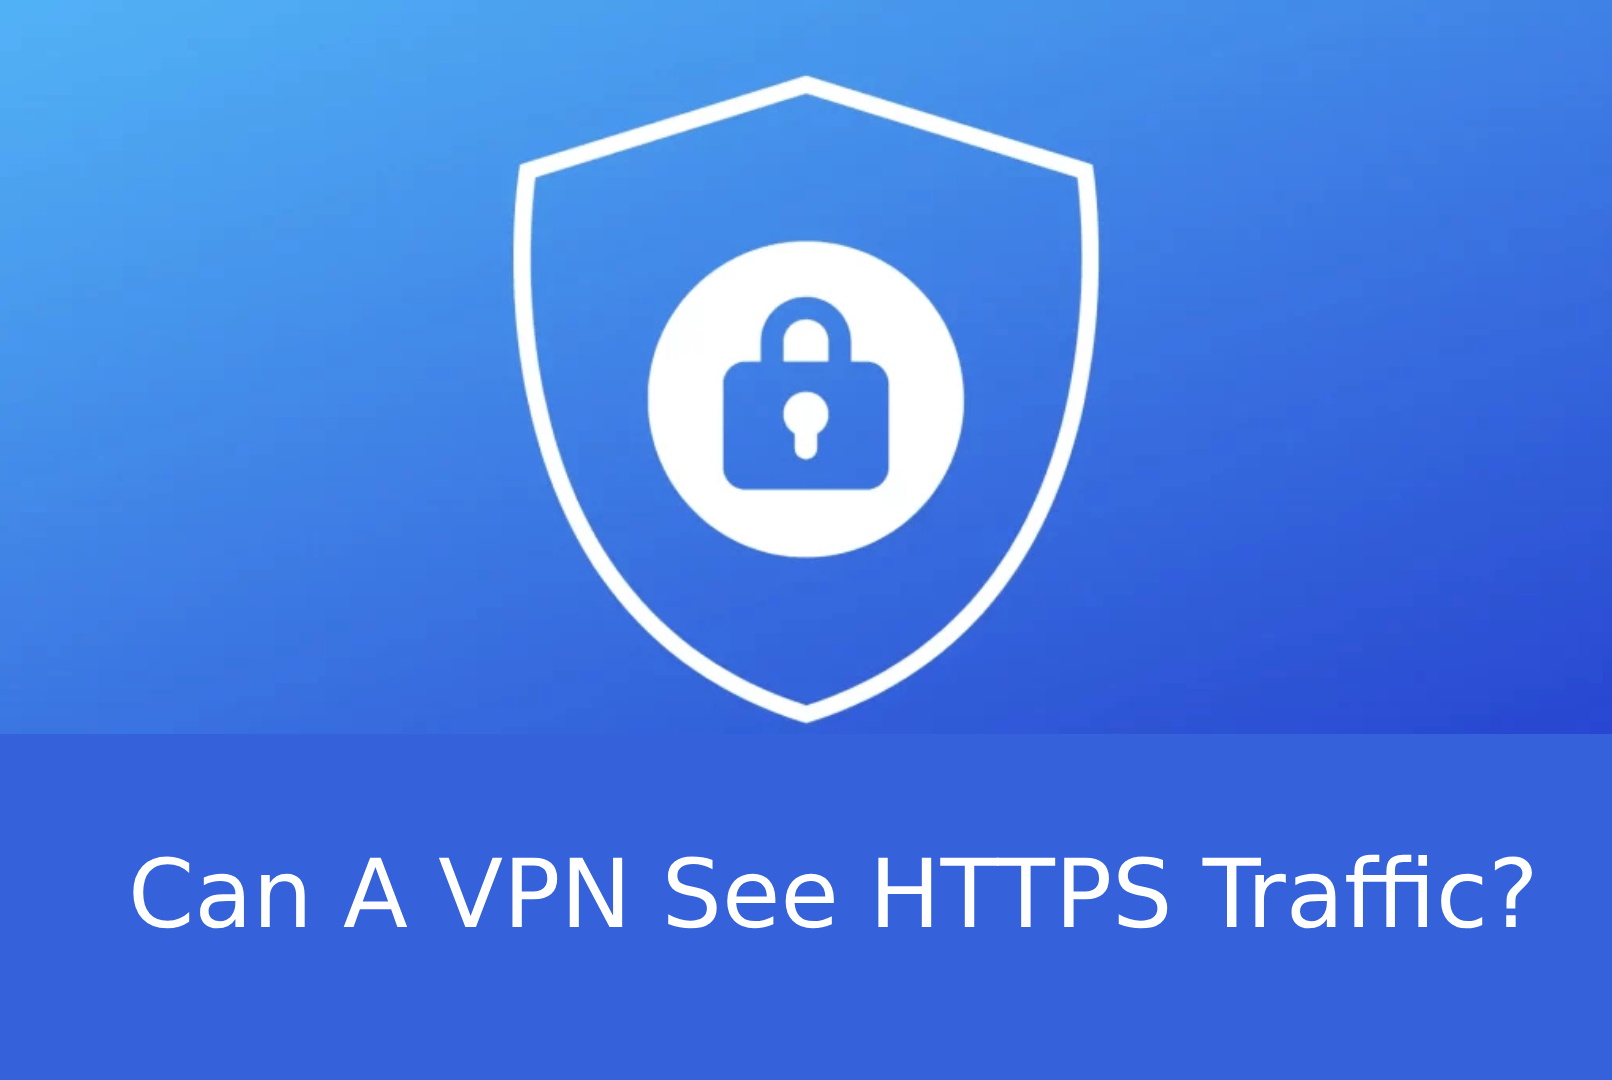 Can a VPN Provider See HTTPS Traffic?